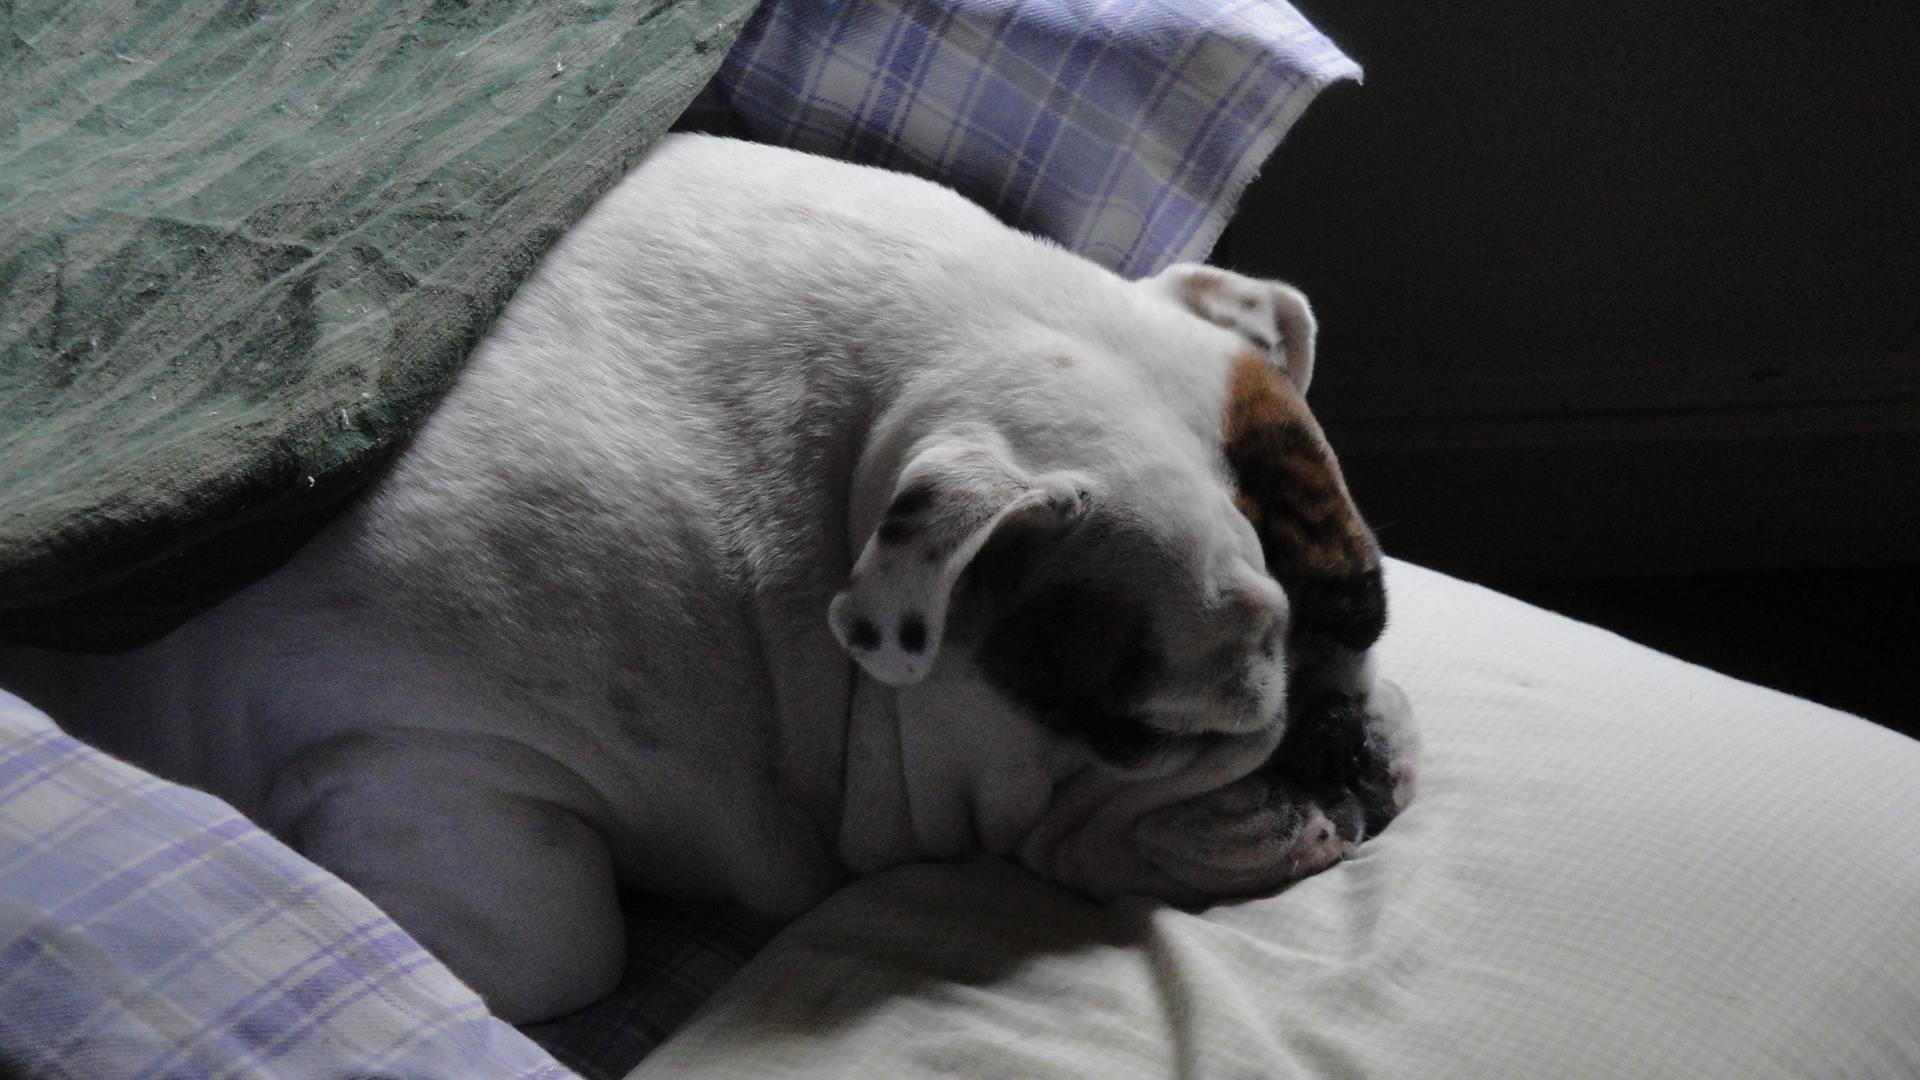 a bulldog is sleeping on some pillows with his head tucked against the pillow